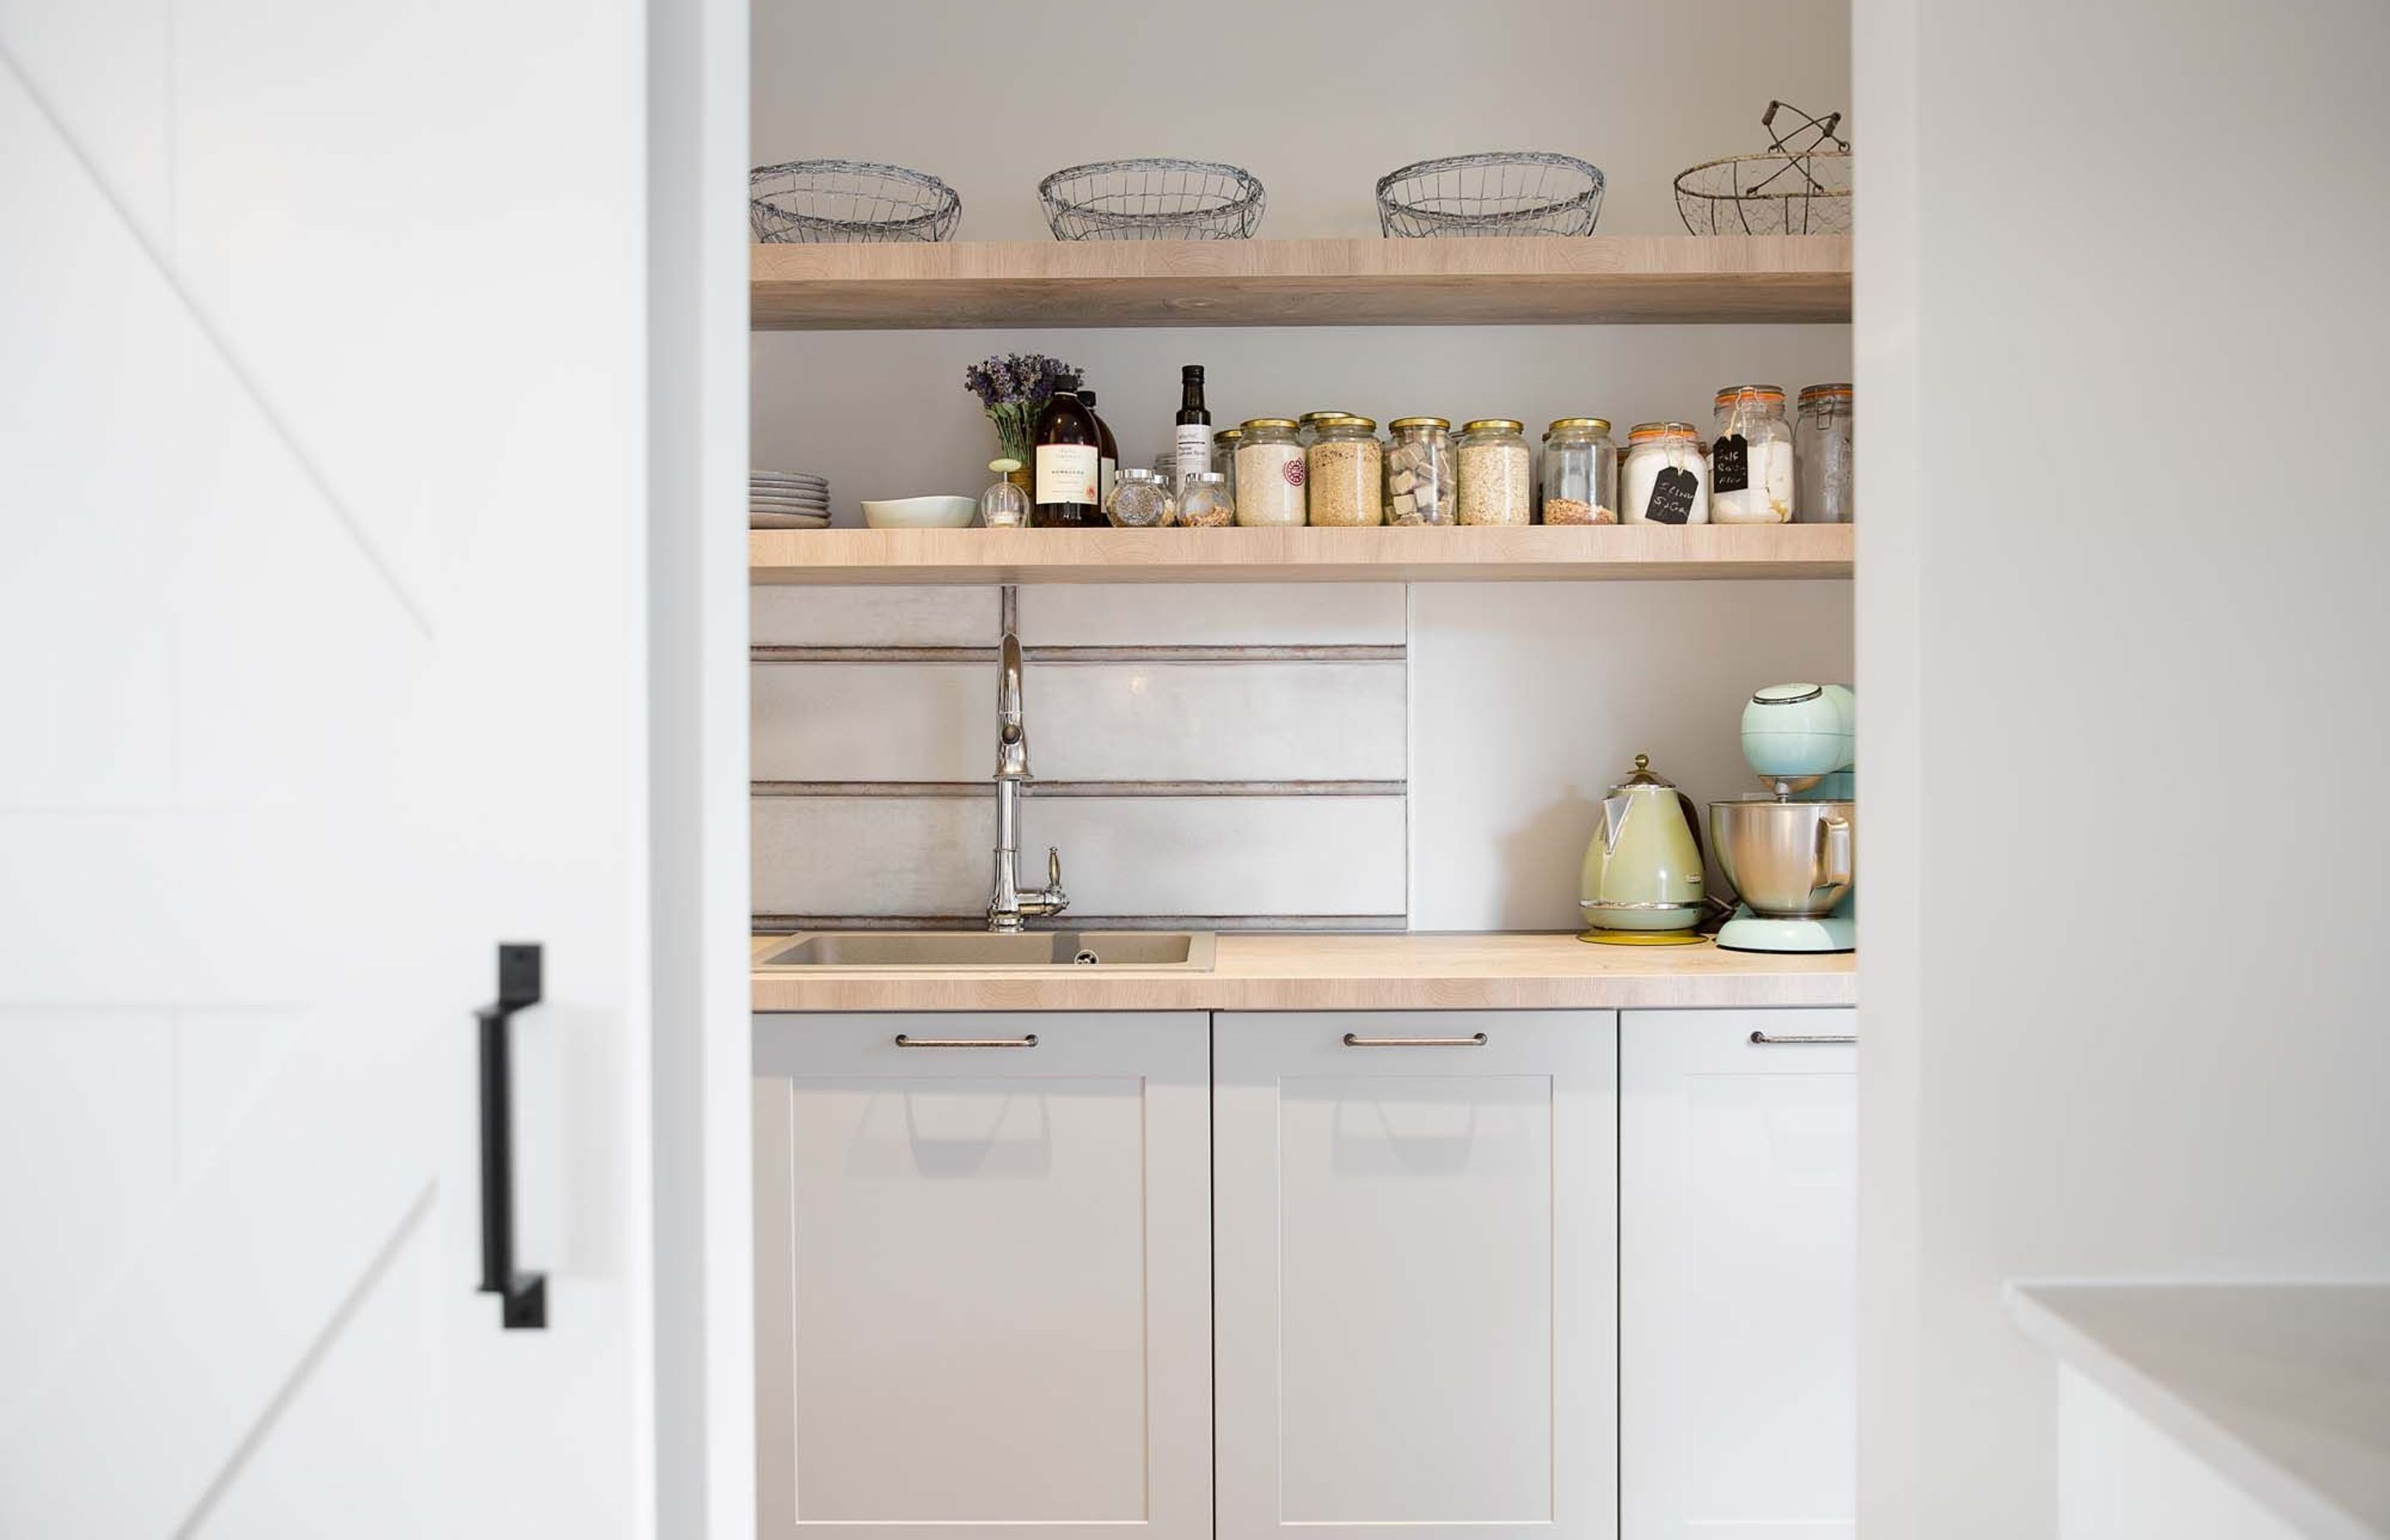 A stylish scullery with open shelving from Hacker Kitchens.